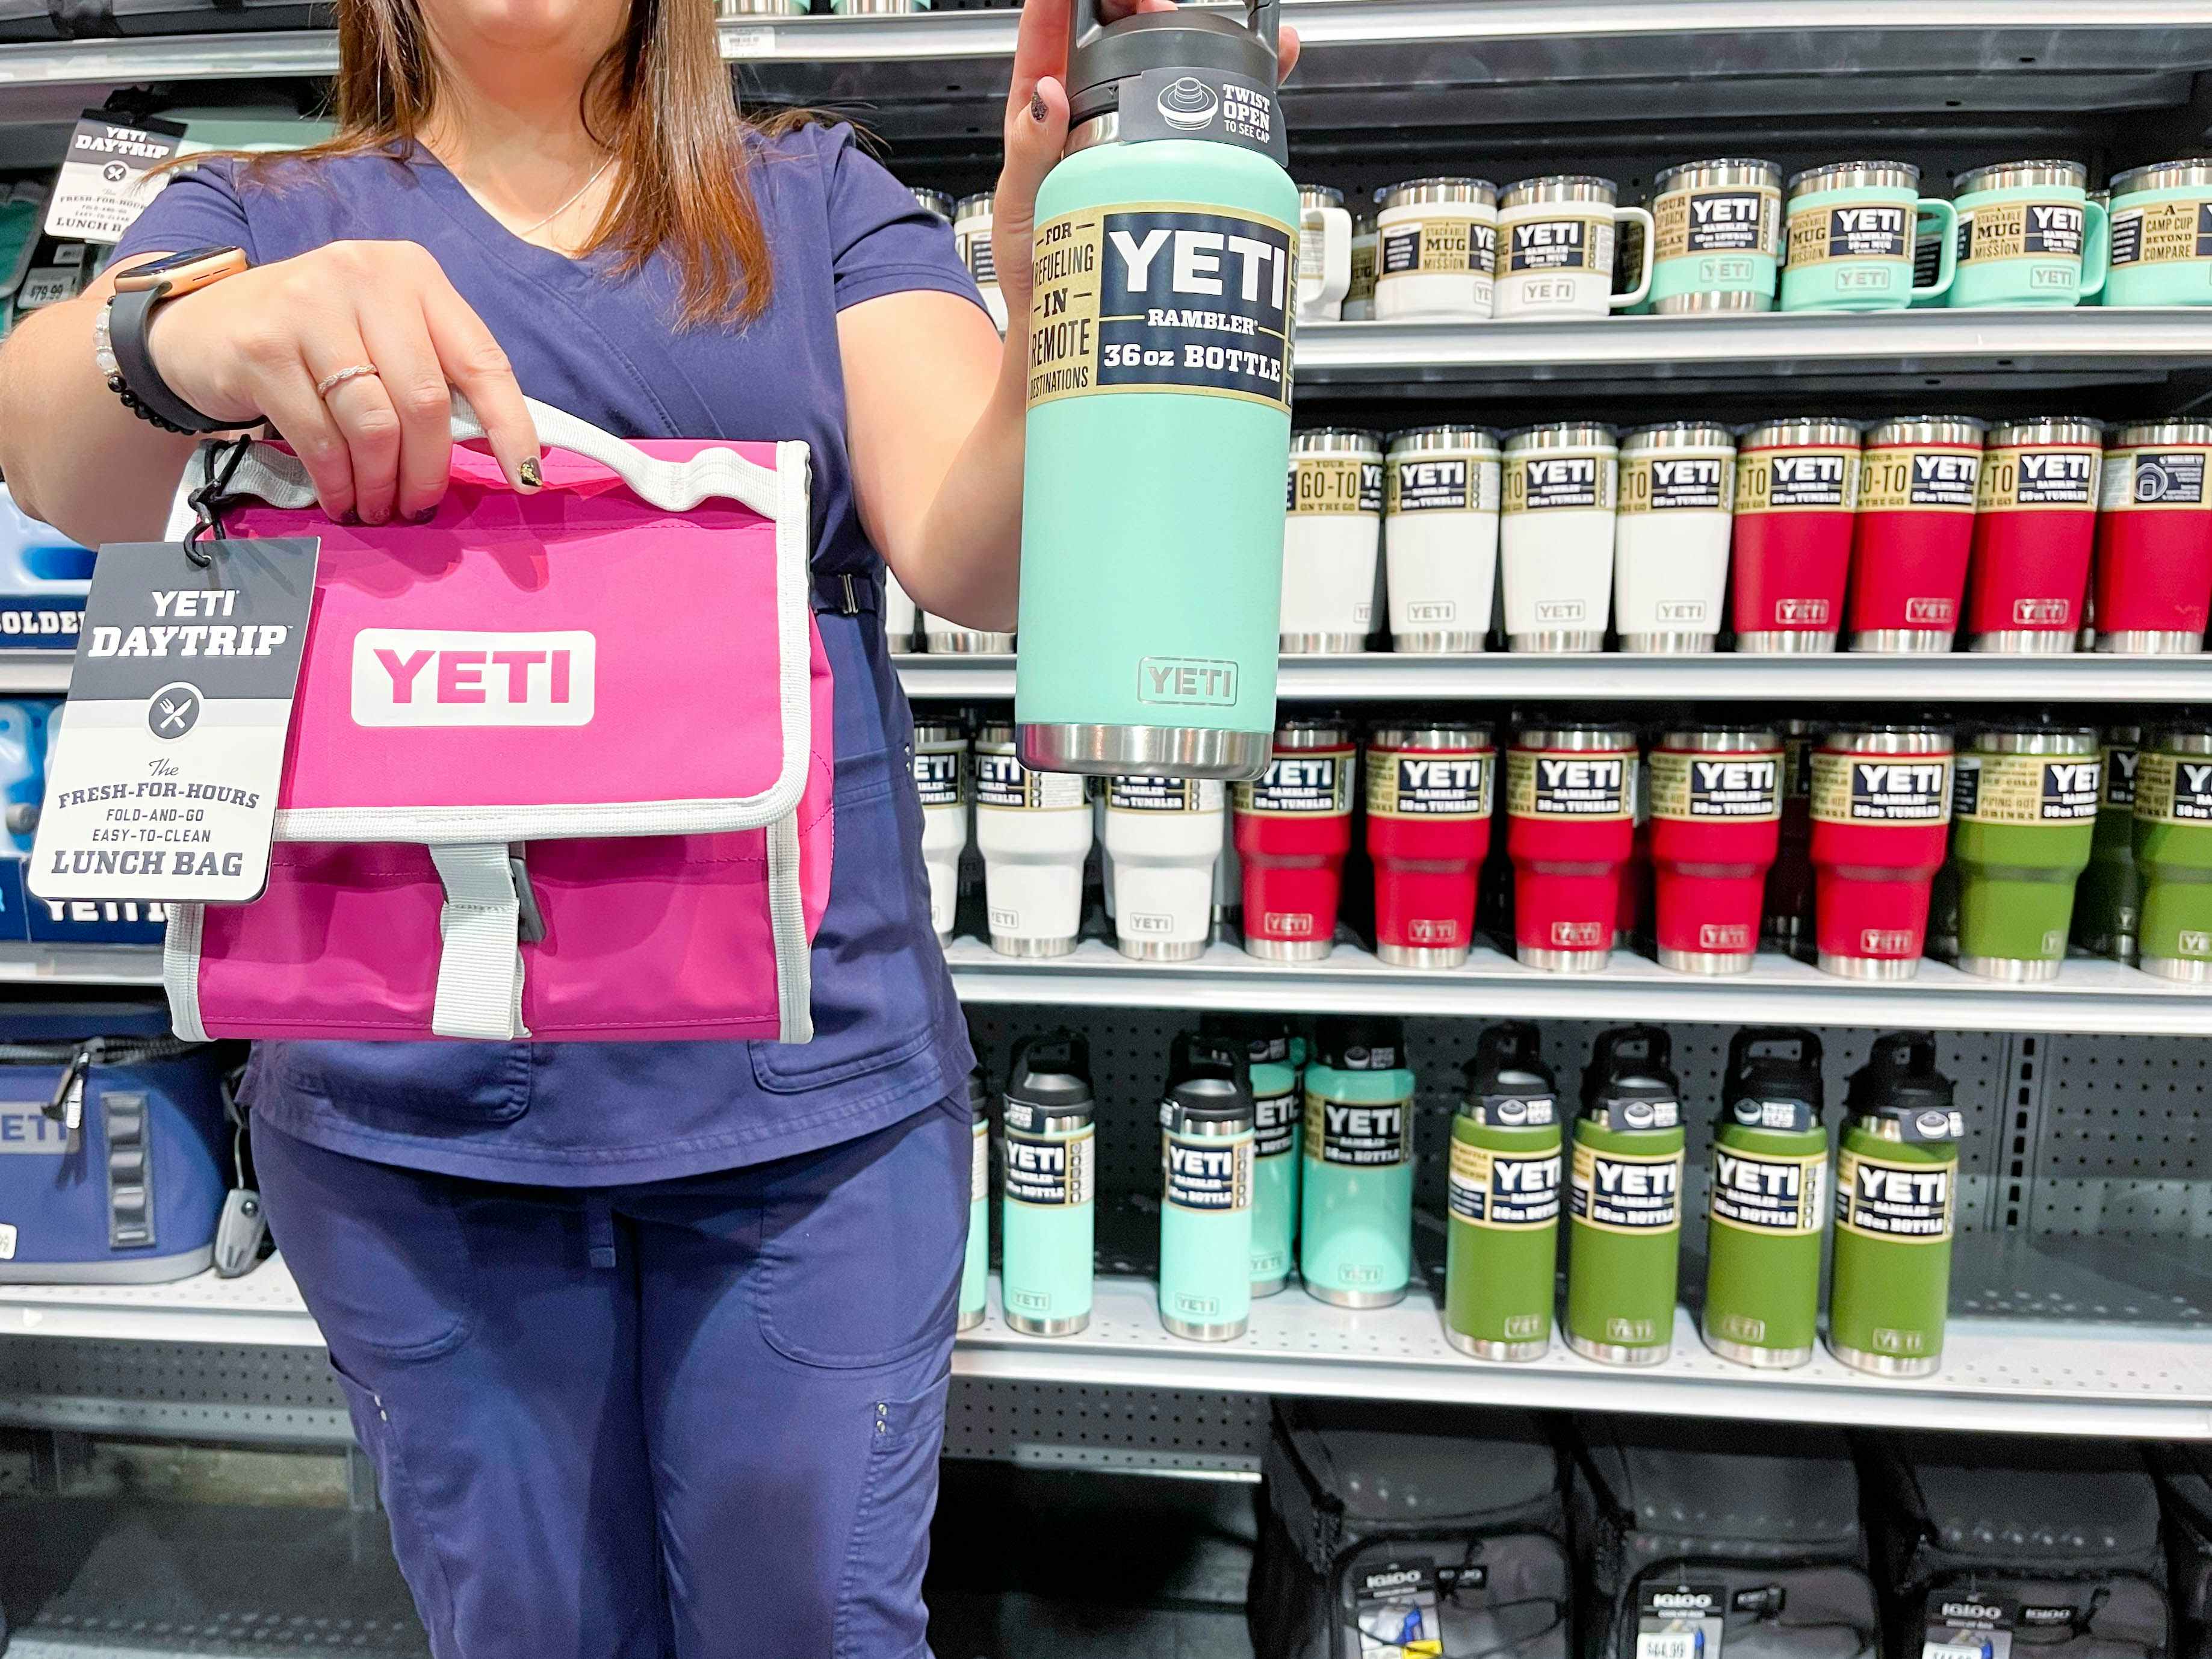 How to Track Down Yeti Black Friday Sales - The Krazy Coupon Lady